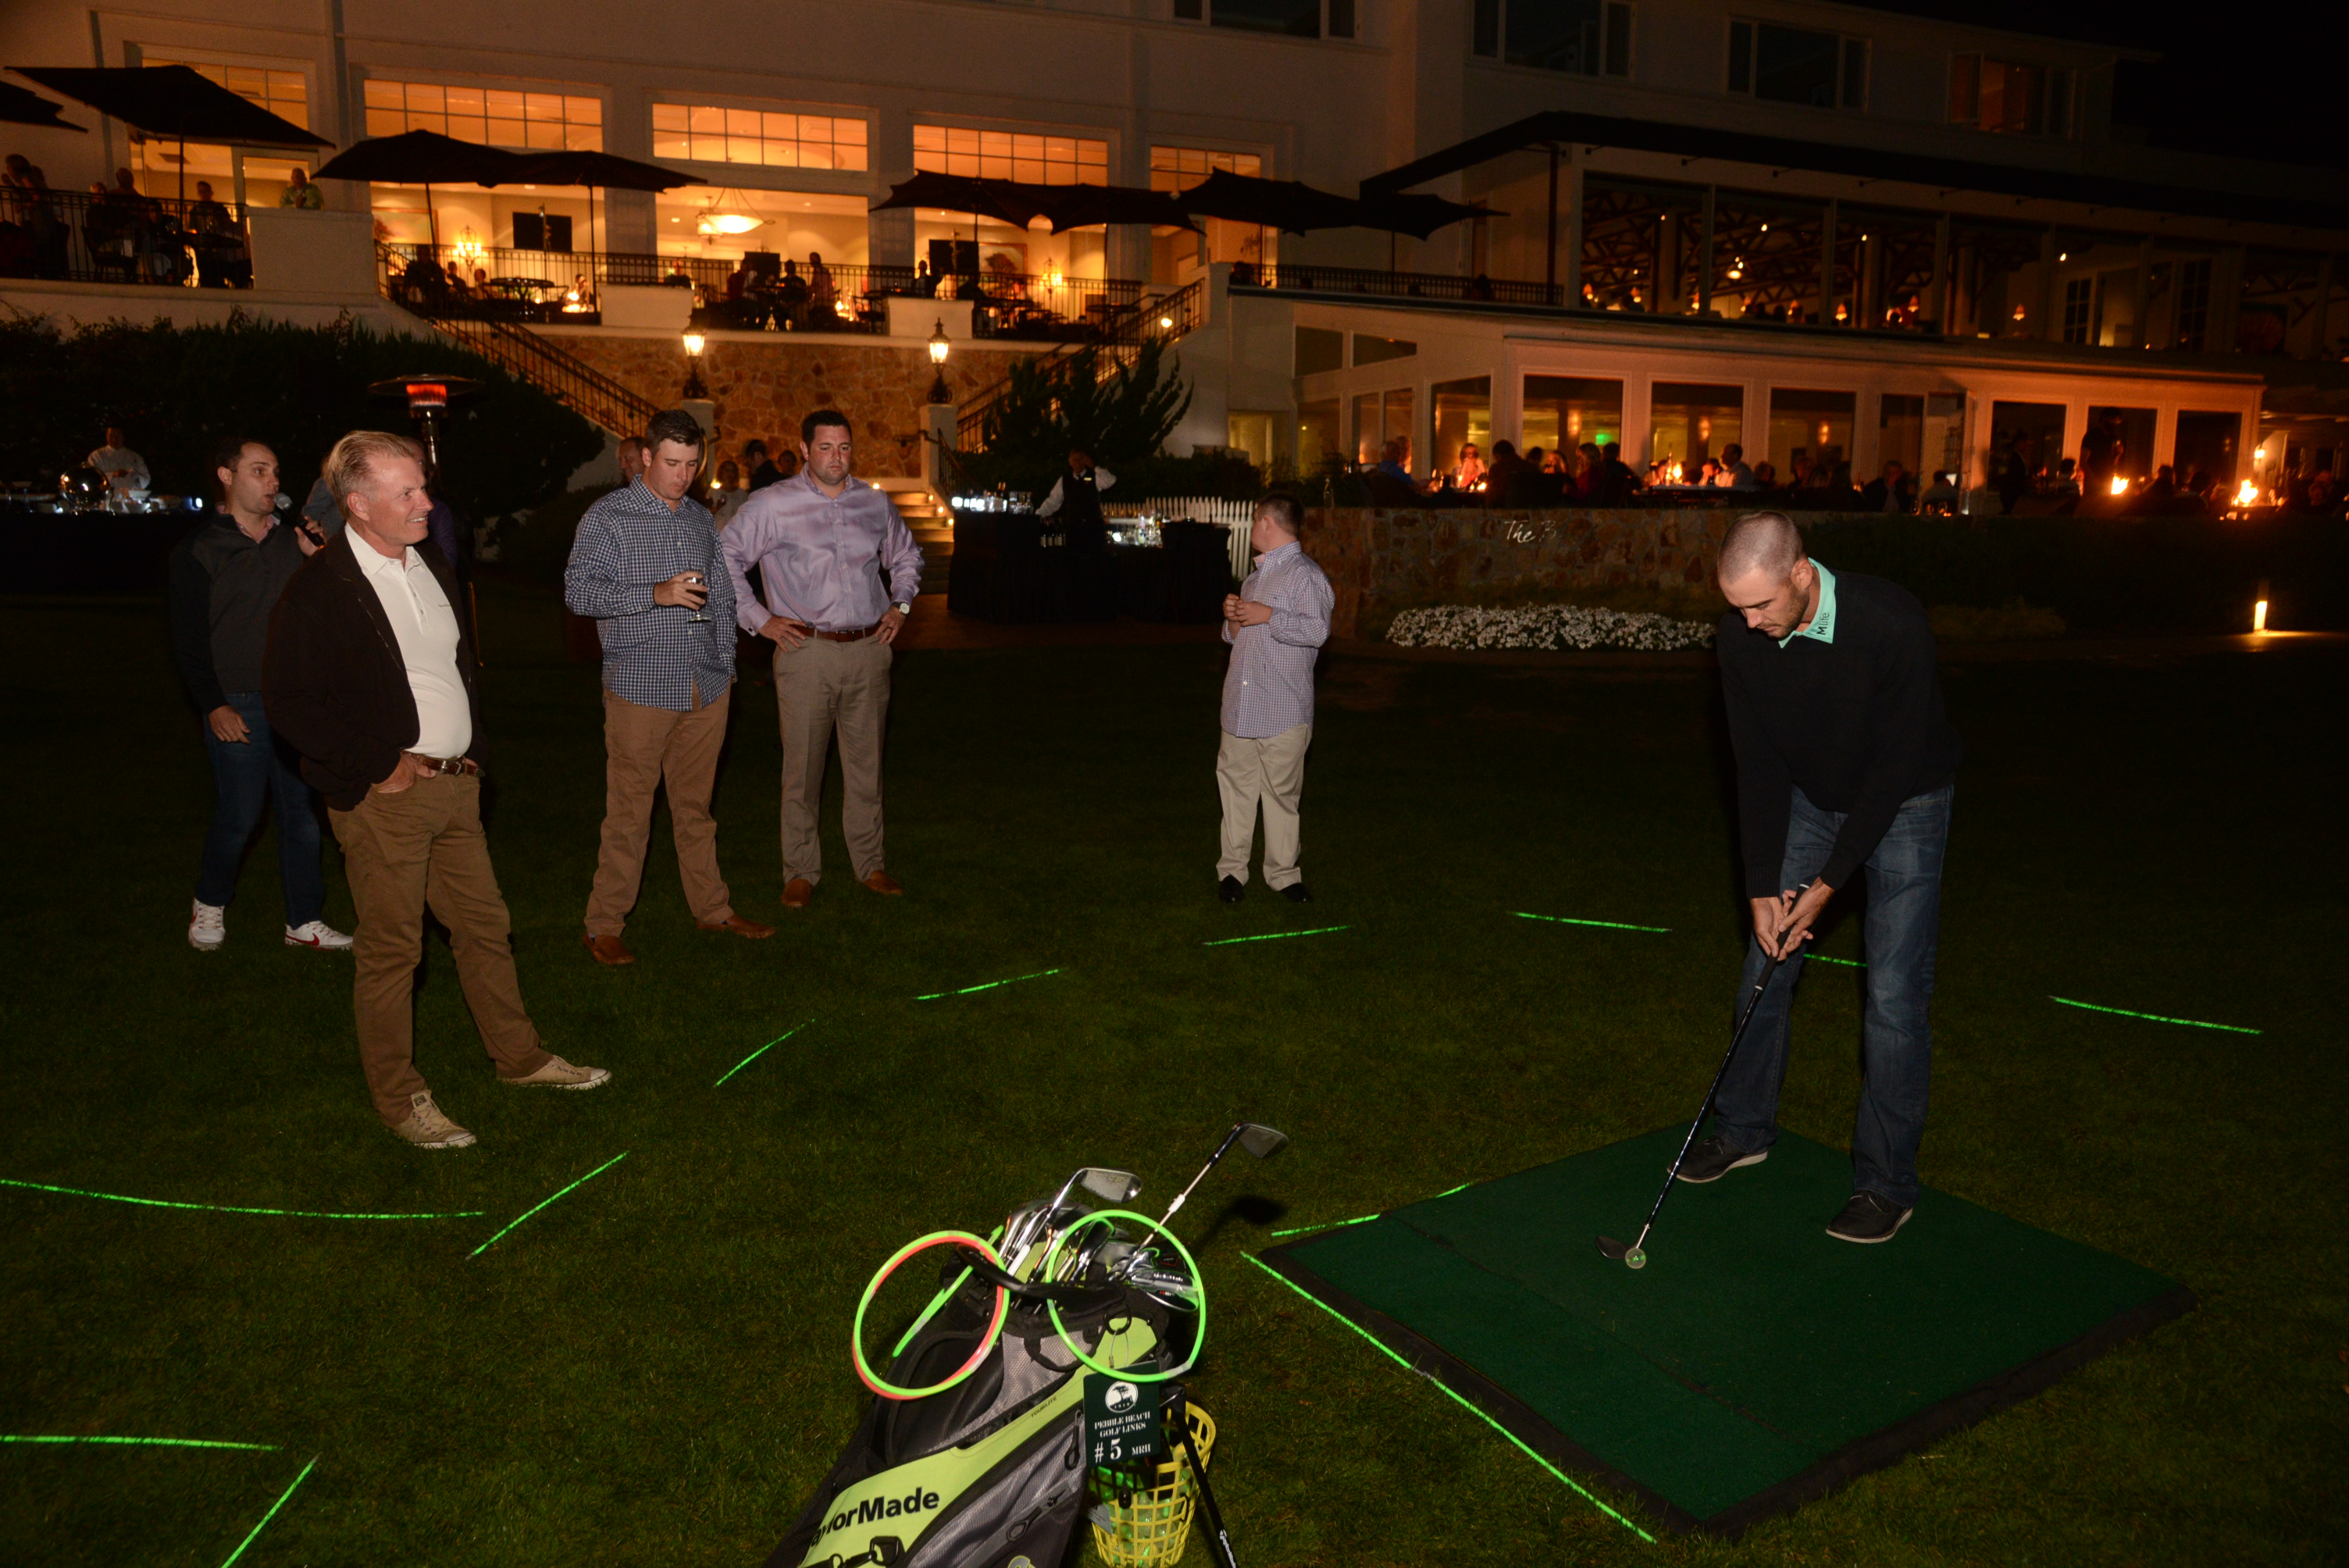 Glow Golf at TWI with guests